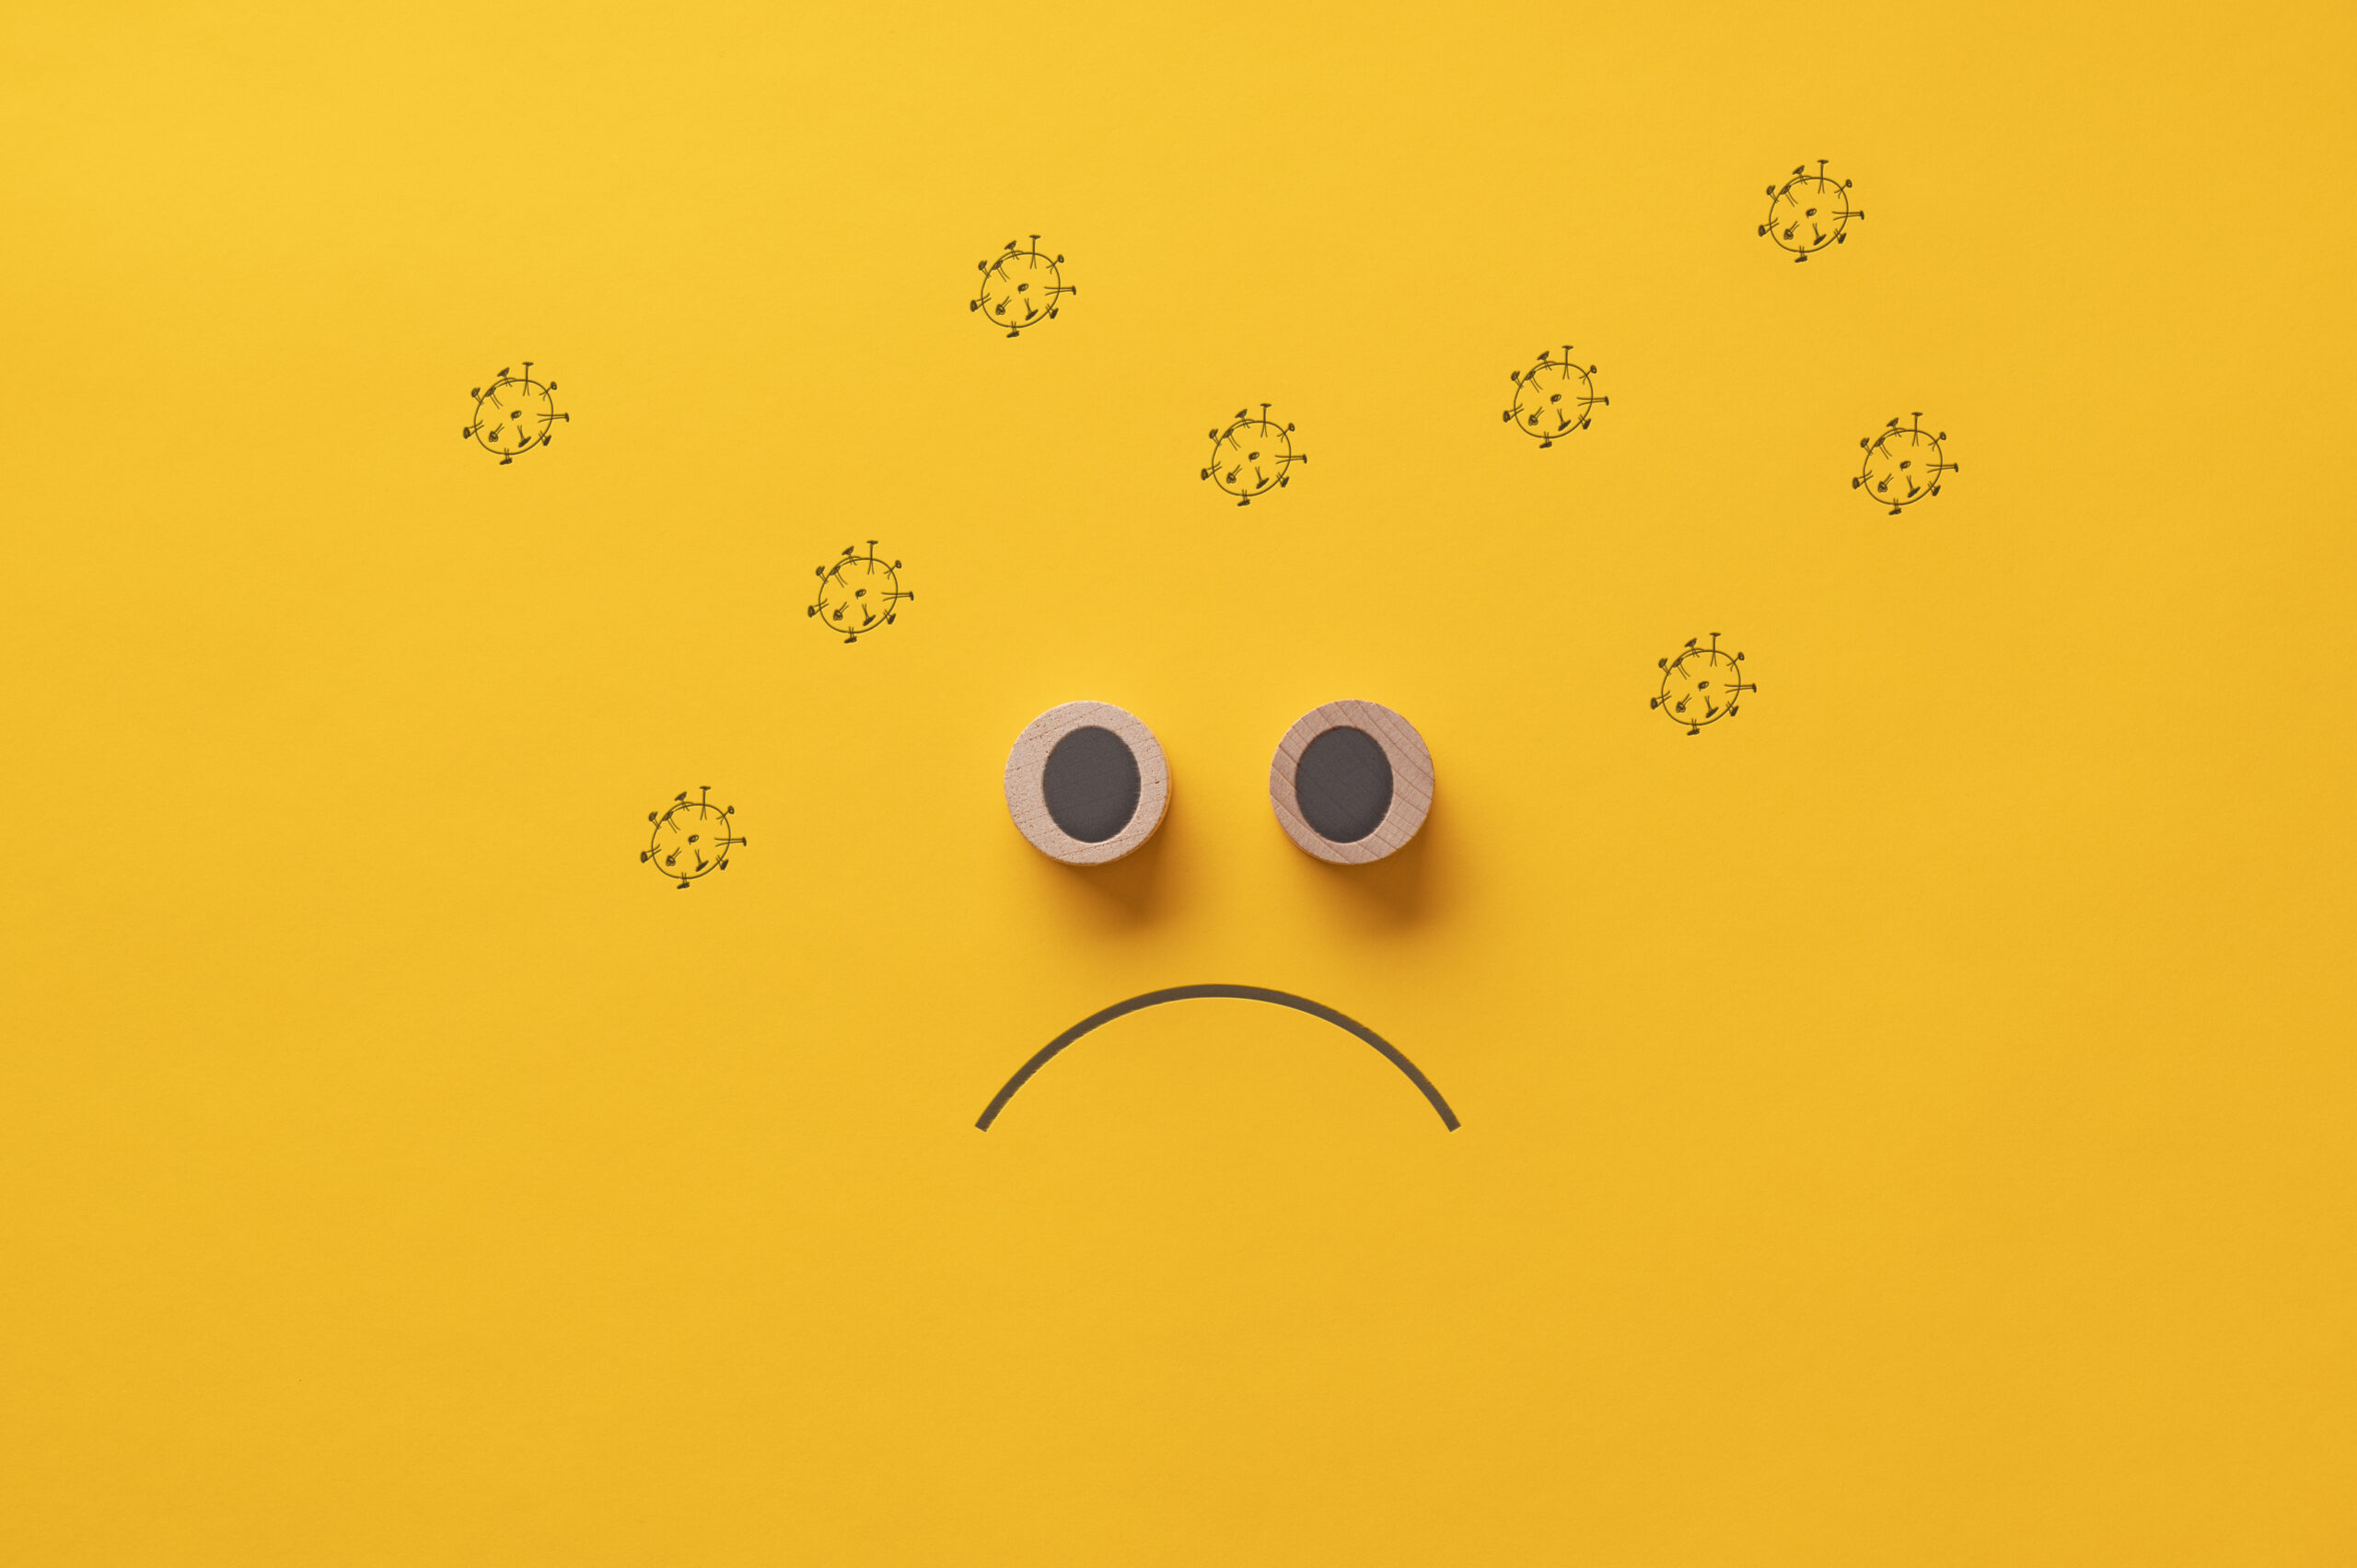 Sad face made of wooden cut circles surrounded with hand drawn coronavirus molecules. Over yellow background.